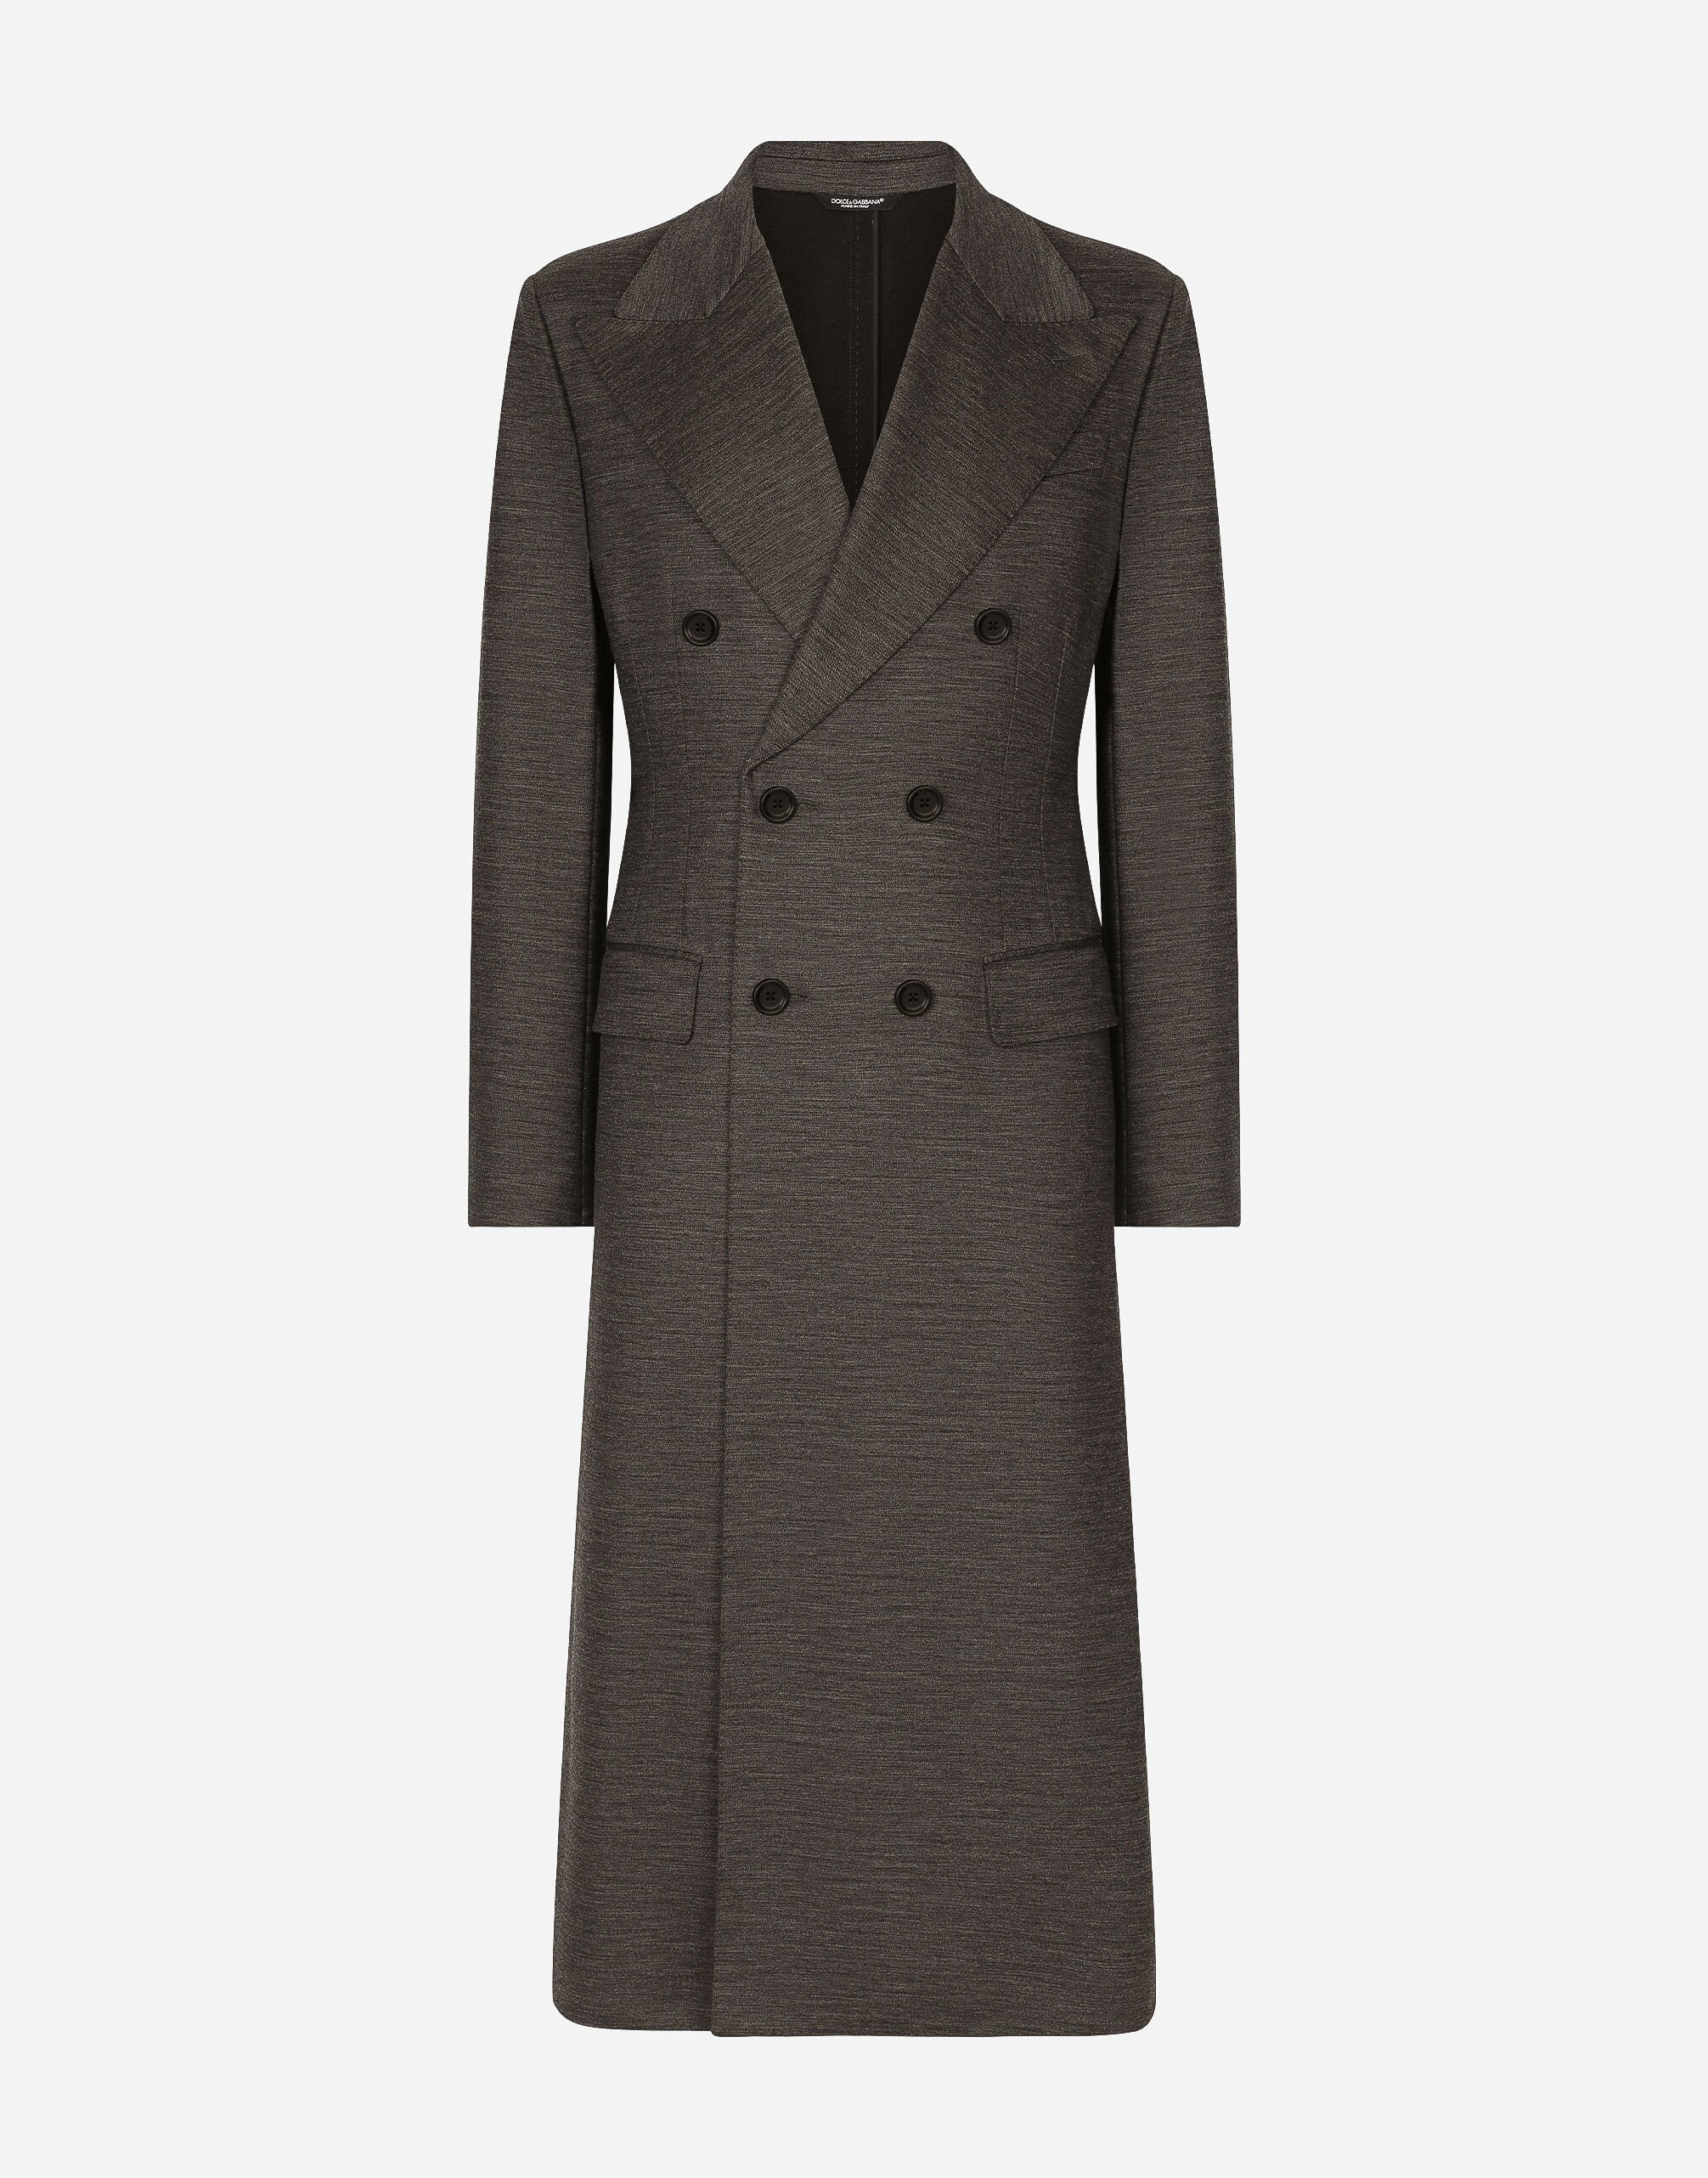 Dolce & Gabbana Double-breasted technical wool jersey coat Black A10792A1203